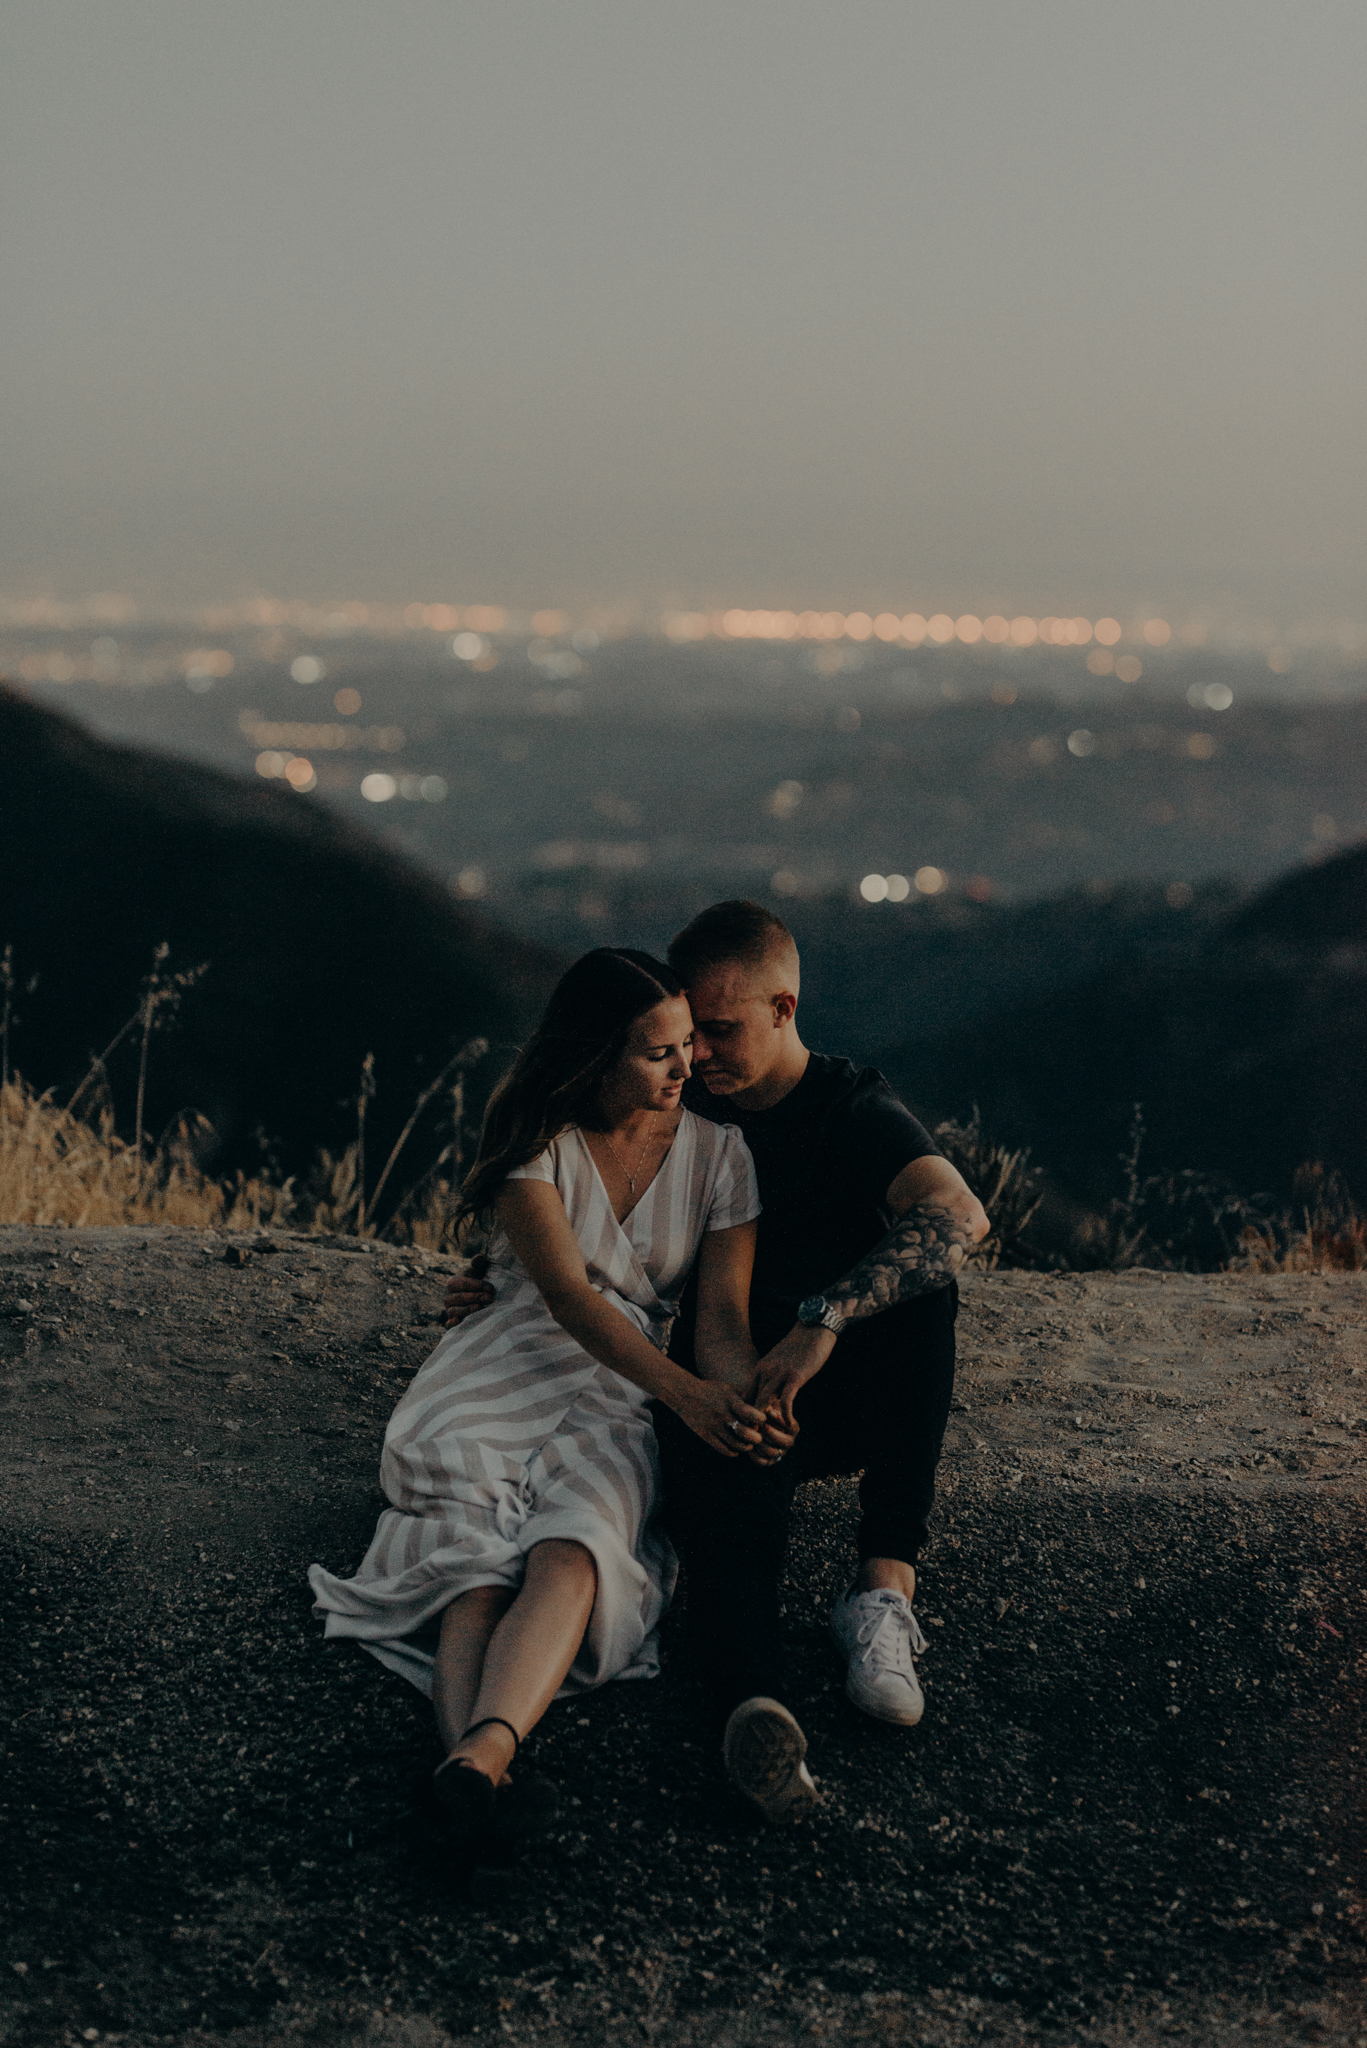 Isaiah + Taylor Photography - Los Angeles Forest Engagement Session - Laid back wedding photographer-051.jpg